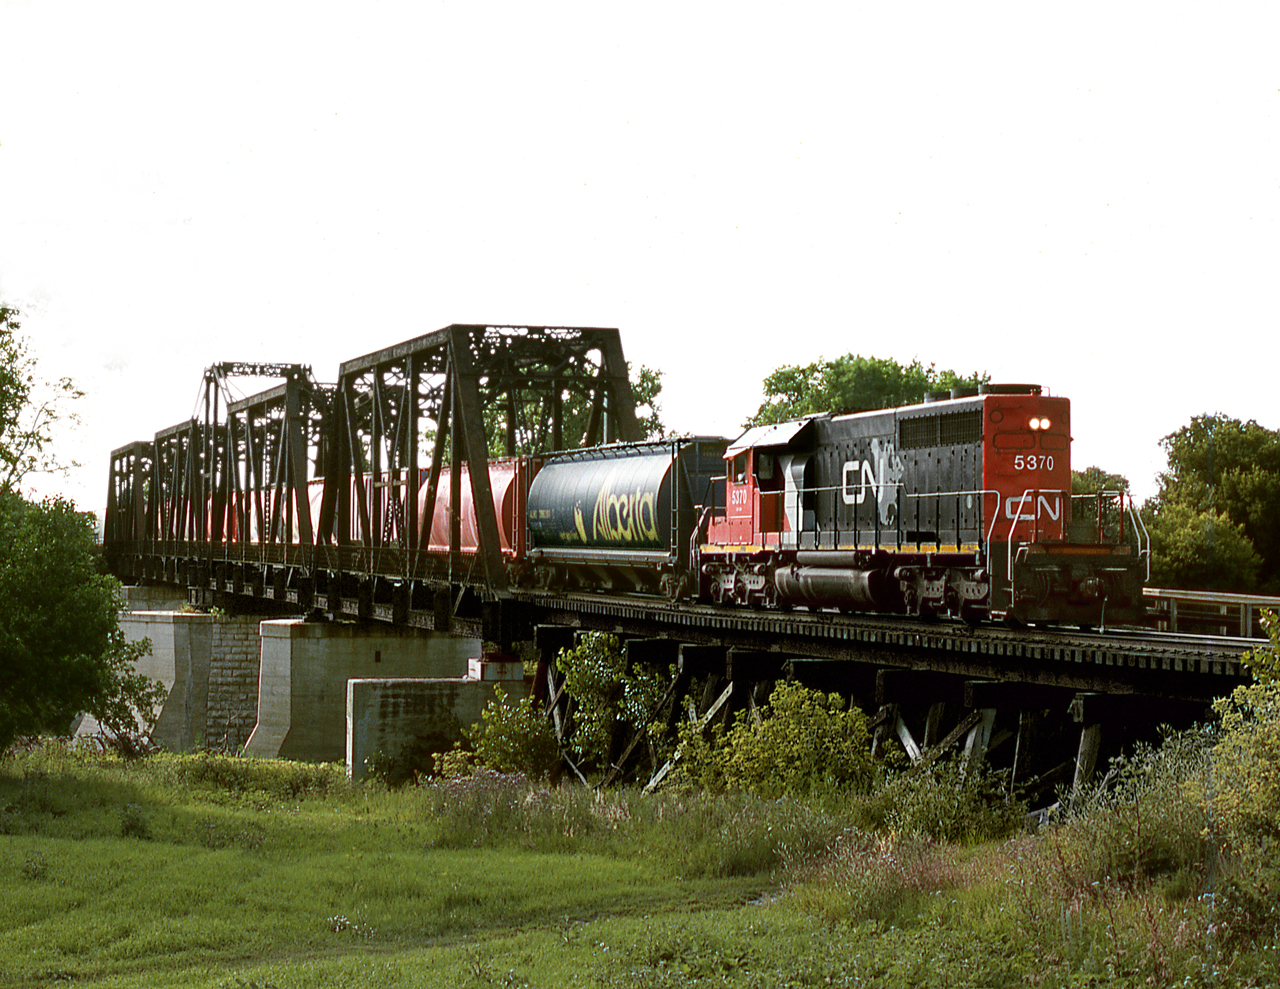 CN's Emerson wayfreight out of Winnipeg crosses the Red River at Emerson after turning on the wye on west side of river,Former NP junction. It will pick up cars off the BNSF(Former GN) including haulage cars for BNSF's yard at Winnipeg. The train operated in 2003 as a daily daylight turn